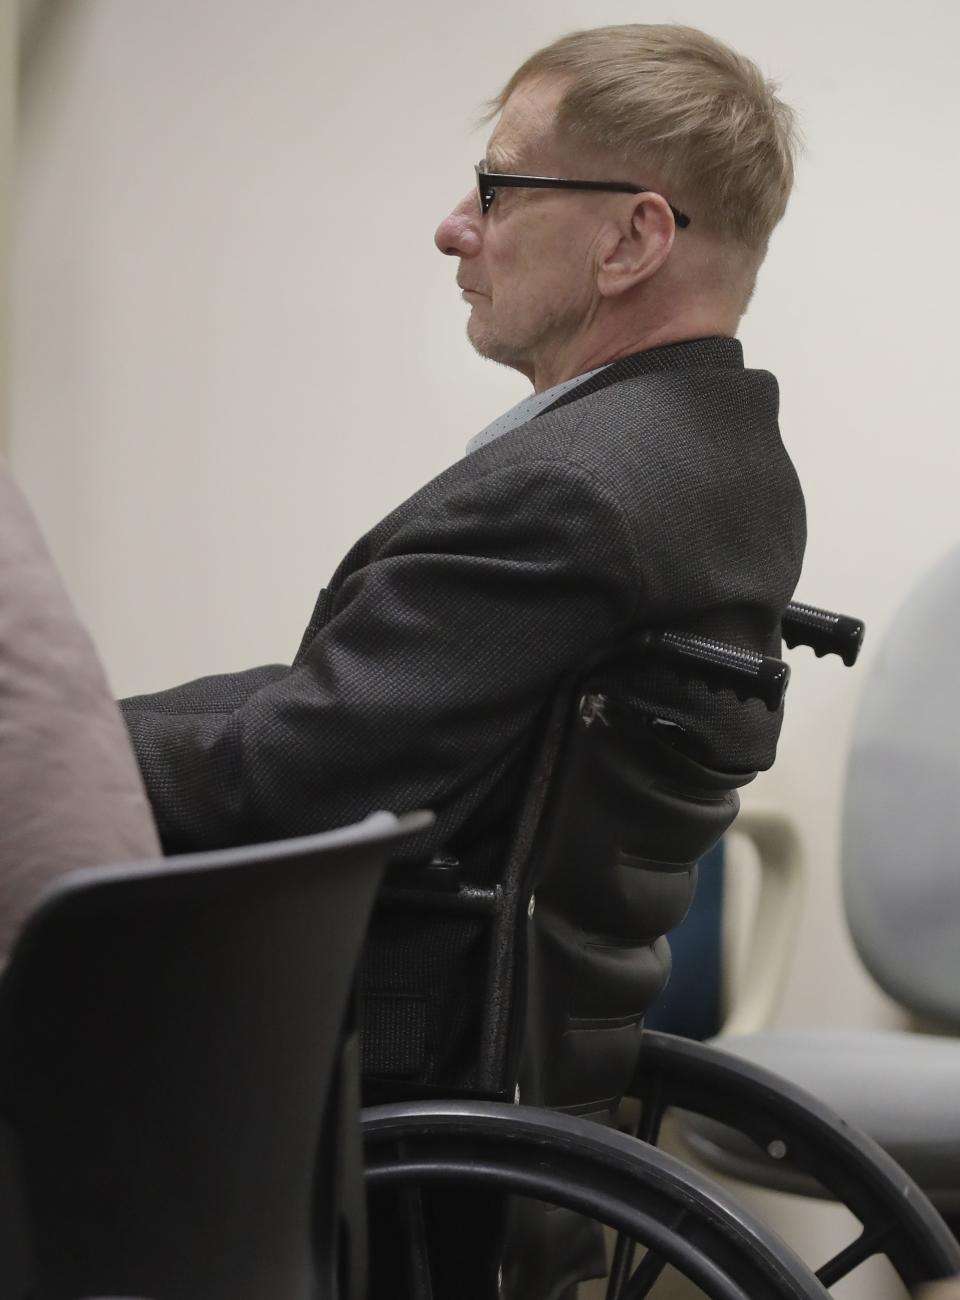 The trial of Gene Meyer, 68, who is charged with first-degree murder and first-degree sexual assault with use of a dangerous weapon in Outagamie County Court on Tuesday, May 21, 2024 in Appleton, Wis. Gene Meyer, charged with sexually assaulting and murdering 60-year-old Betty Rolf in 1988. Meyer was arrested in Washington about 34 years later, in 2022, after a 2019 familial DNA search identified him as a suspect. Investigators learned Meyer had at one time lived a mile from where Rolf's body was found in 1988.
Wm. Glasheen USA TODAY NETWORK-Wisconsin